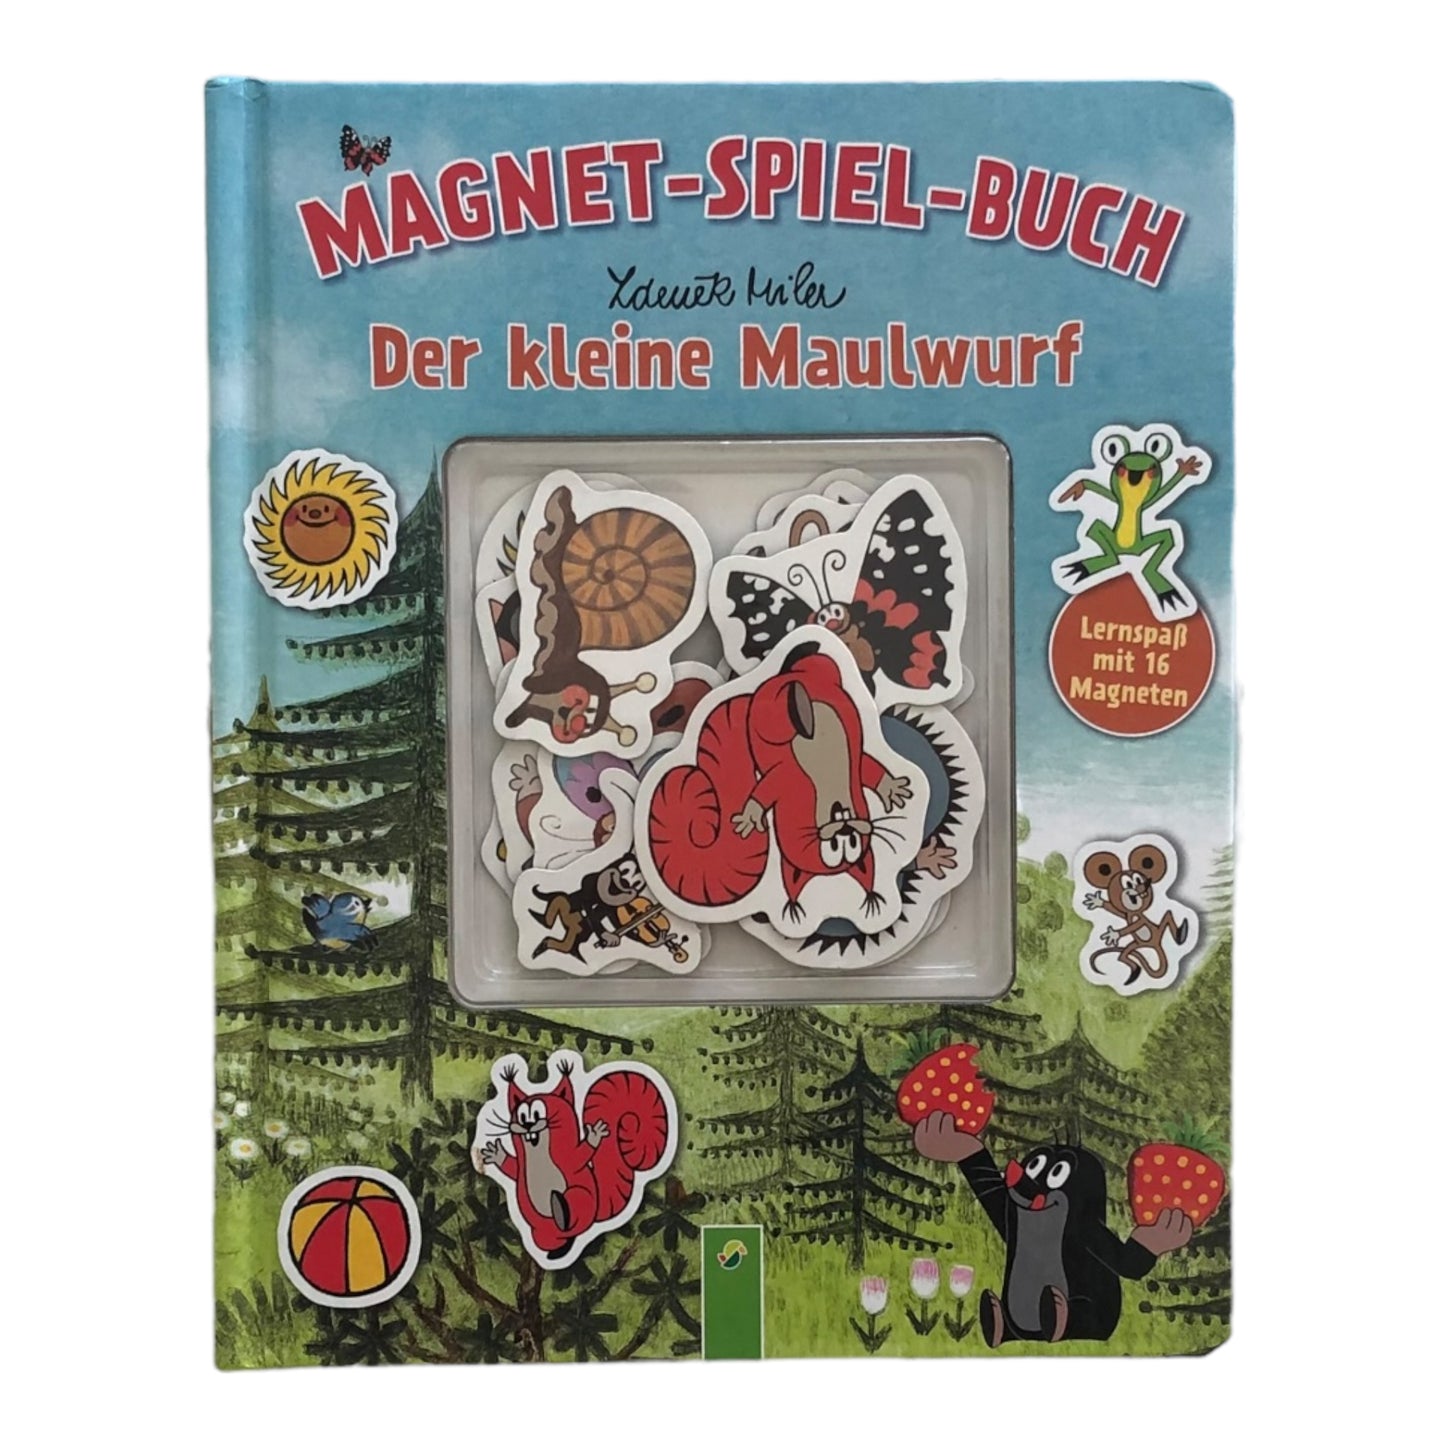 Magnet play book - The little mole (German version)